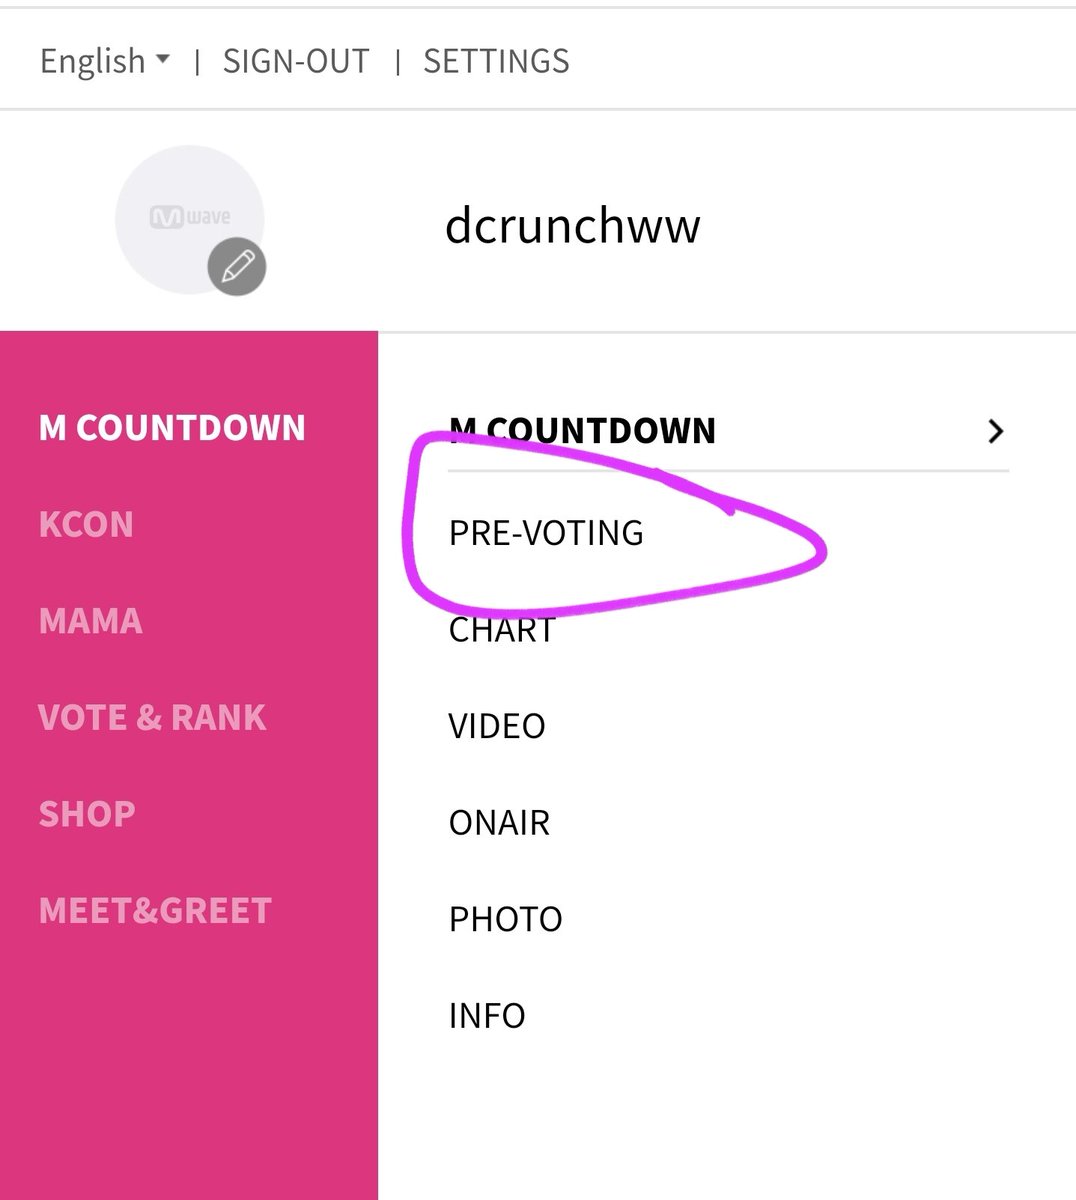 You'll be directed to the main page after signing in, click on the three horizontal lines on the top right again. This time you will click 'PRE-VOTING'. After clicking, you will see a list with all the songs to vote for. Pierrot is the 3rd one listed.